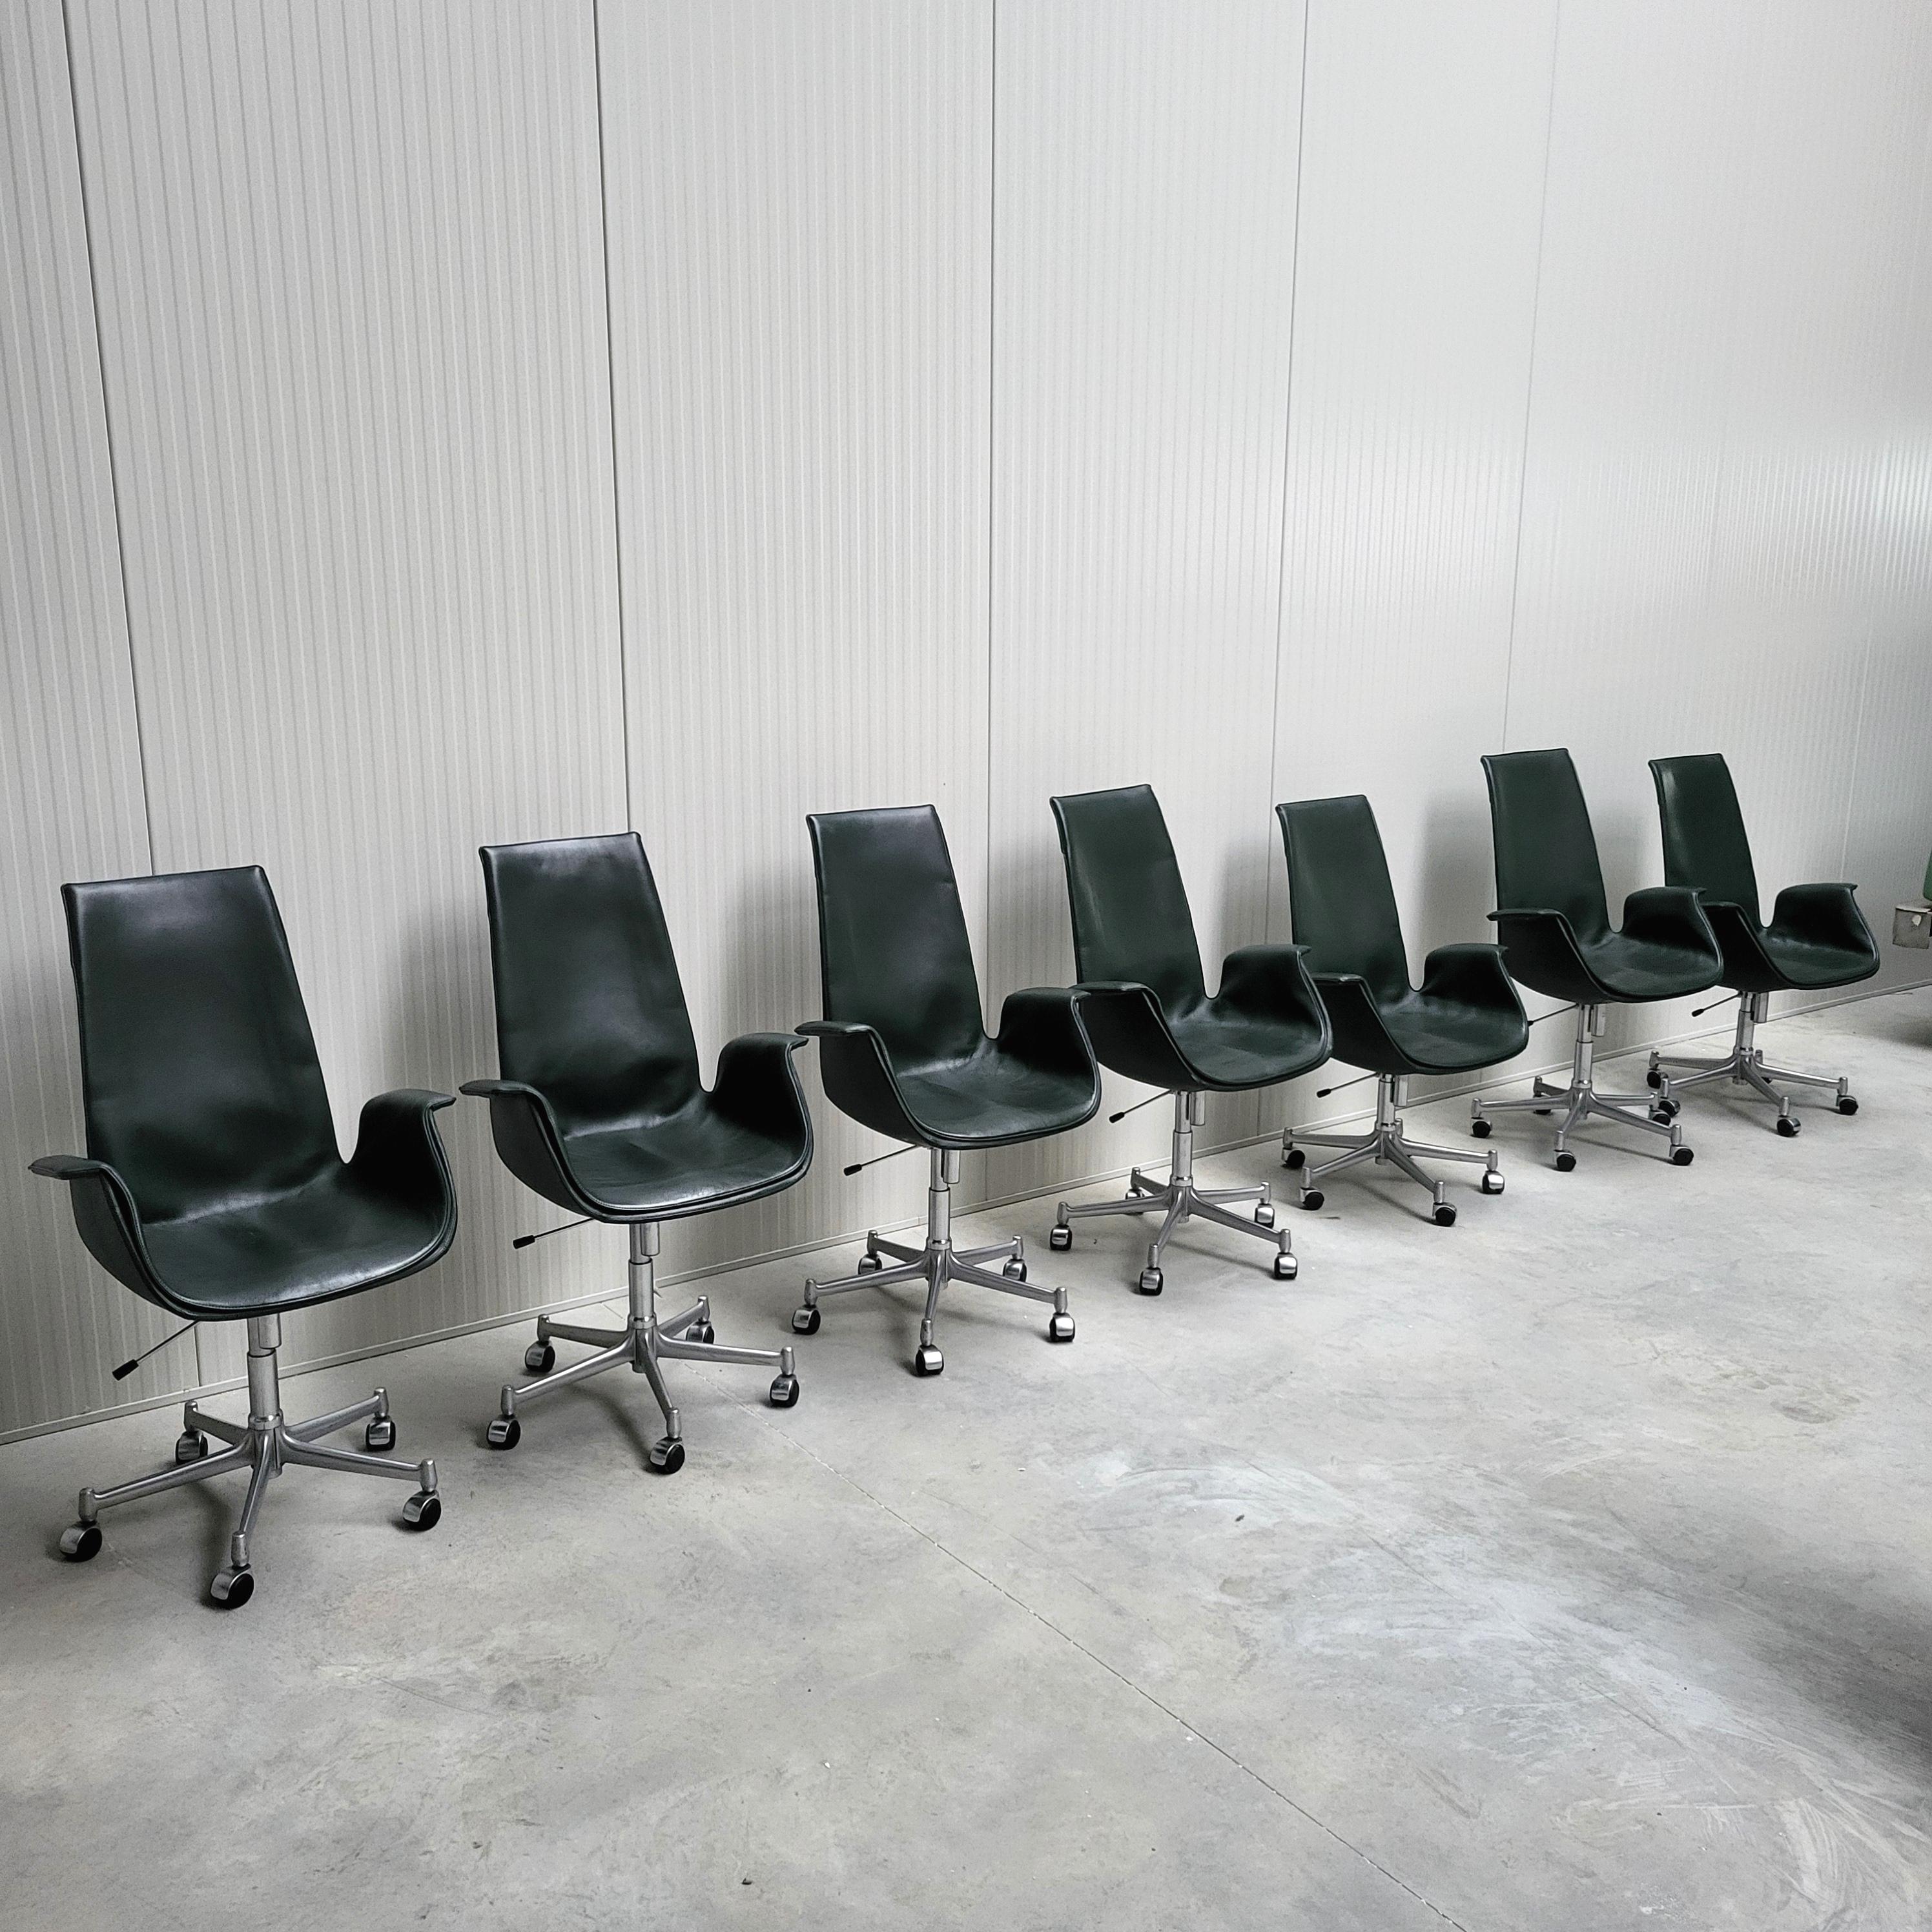 These fine examples of the FK6725 Bird office chairs were designed by Jorgen Kastholm & Preben Fabricius in the early 60s and produced by Walter Knoll in the 1990s. 

The so called 